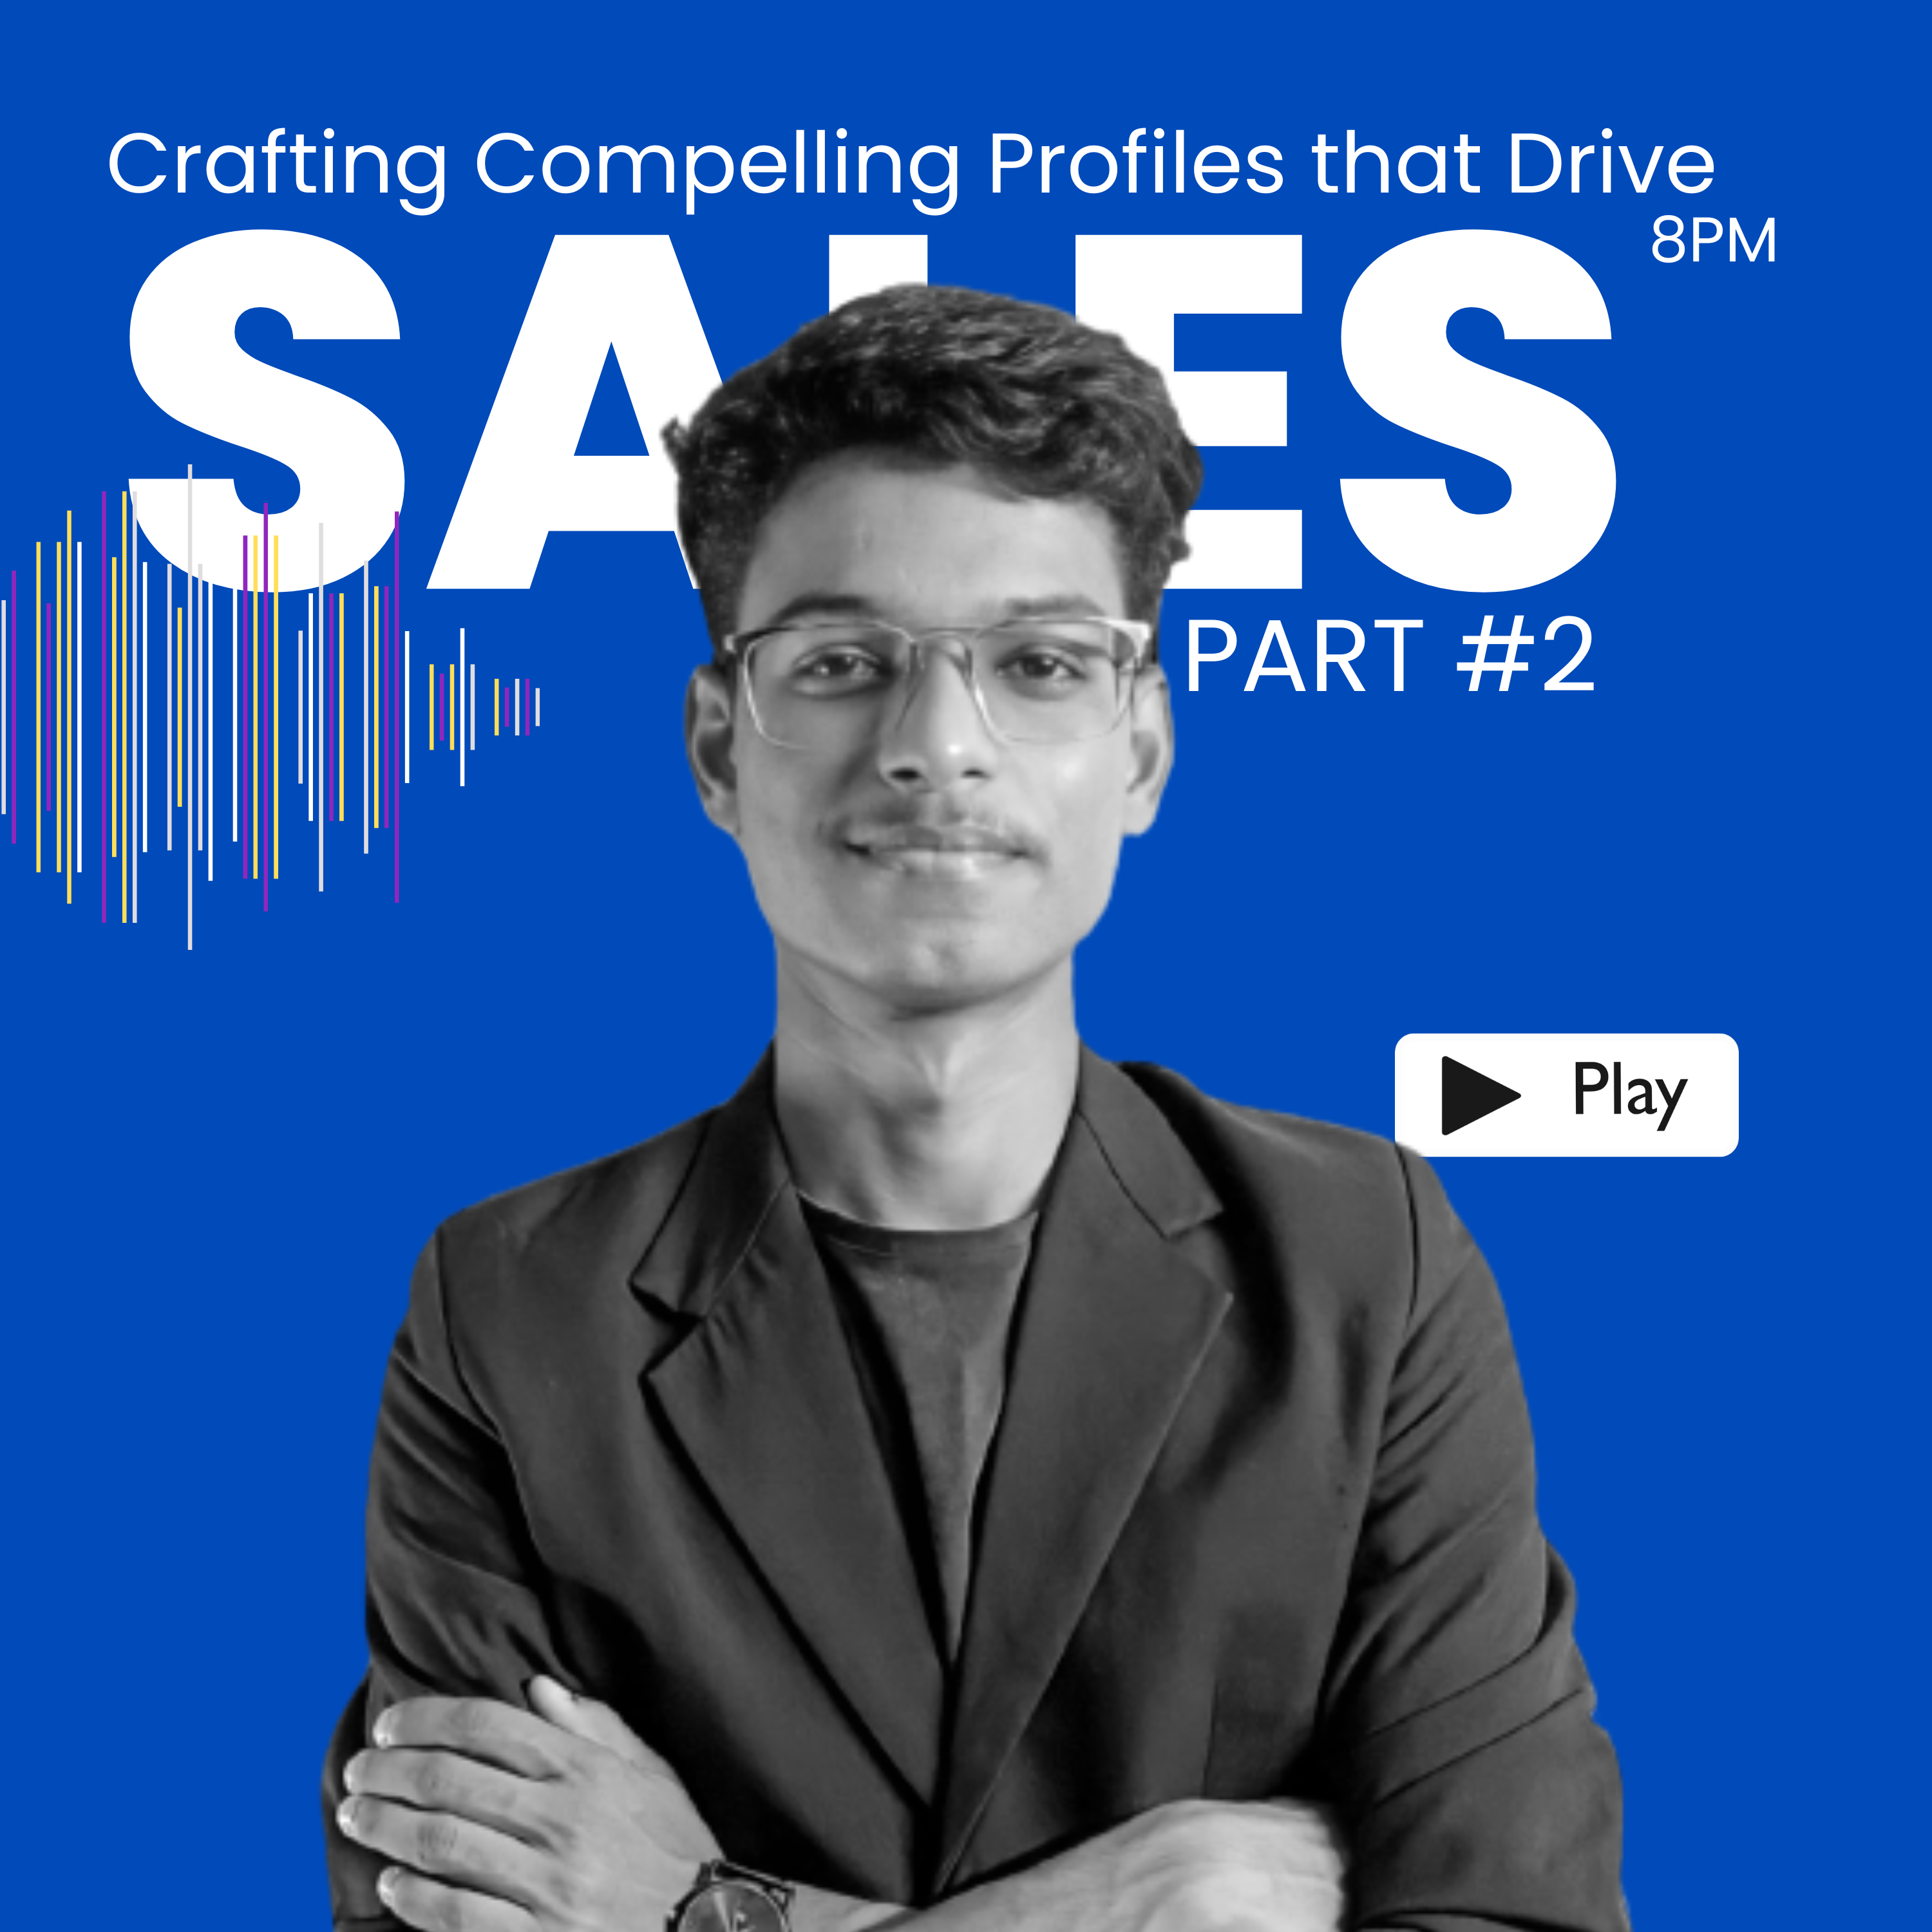 Crafting compelling profiles that drive sales part 2